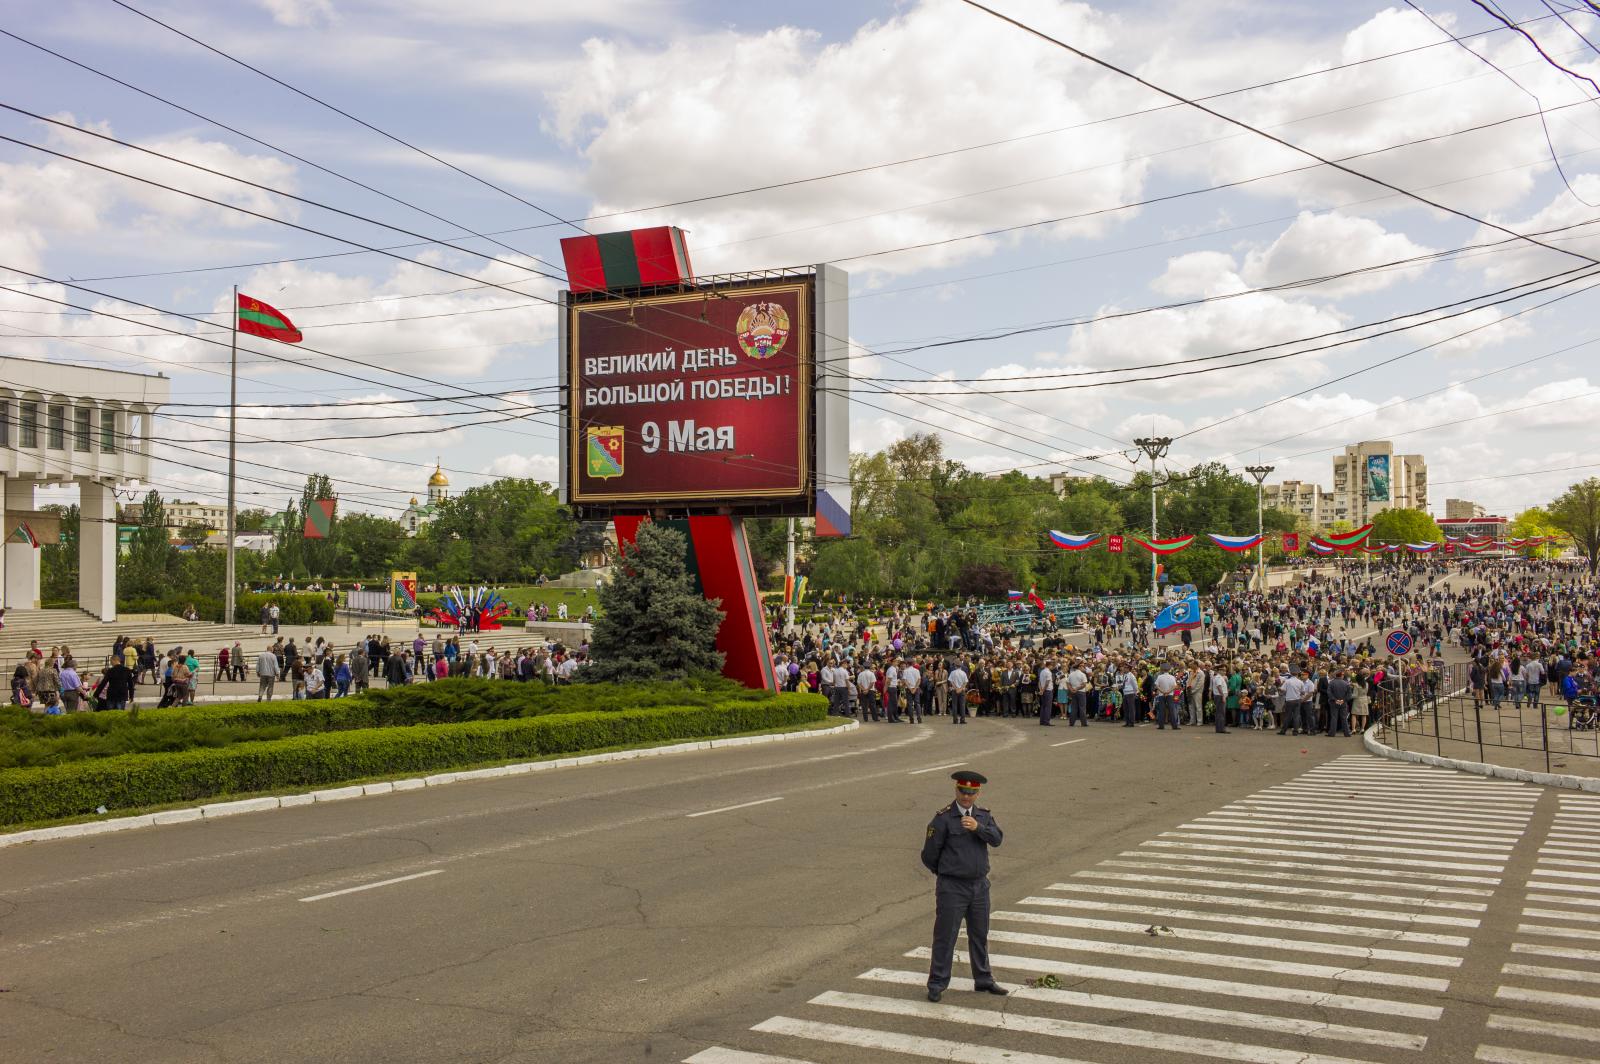 Image from Victory Day in Transnistria -  A board reads "Great day of the great Victory"...